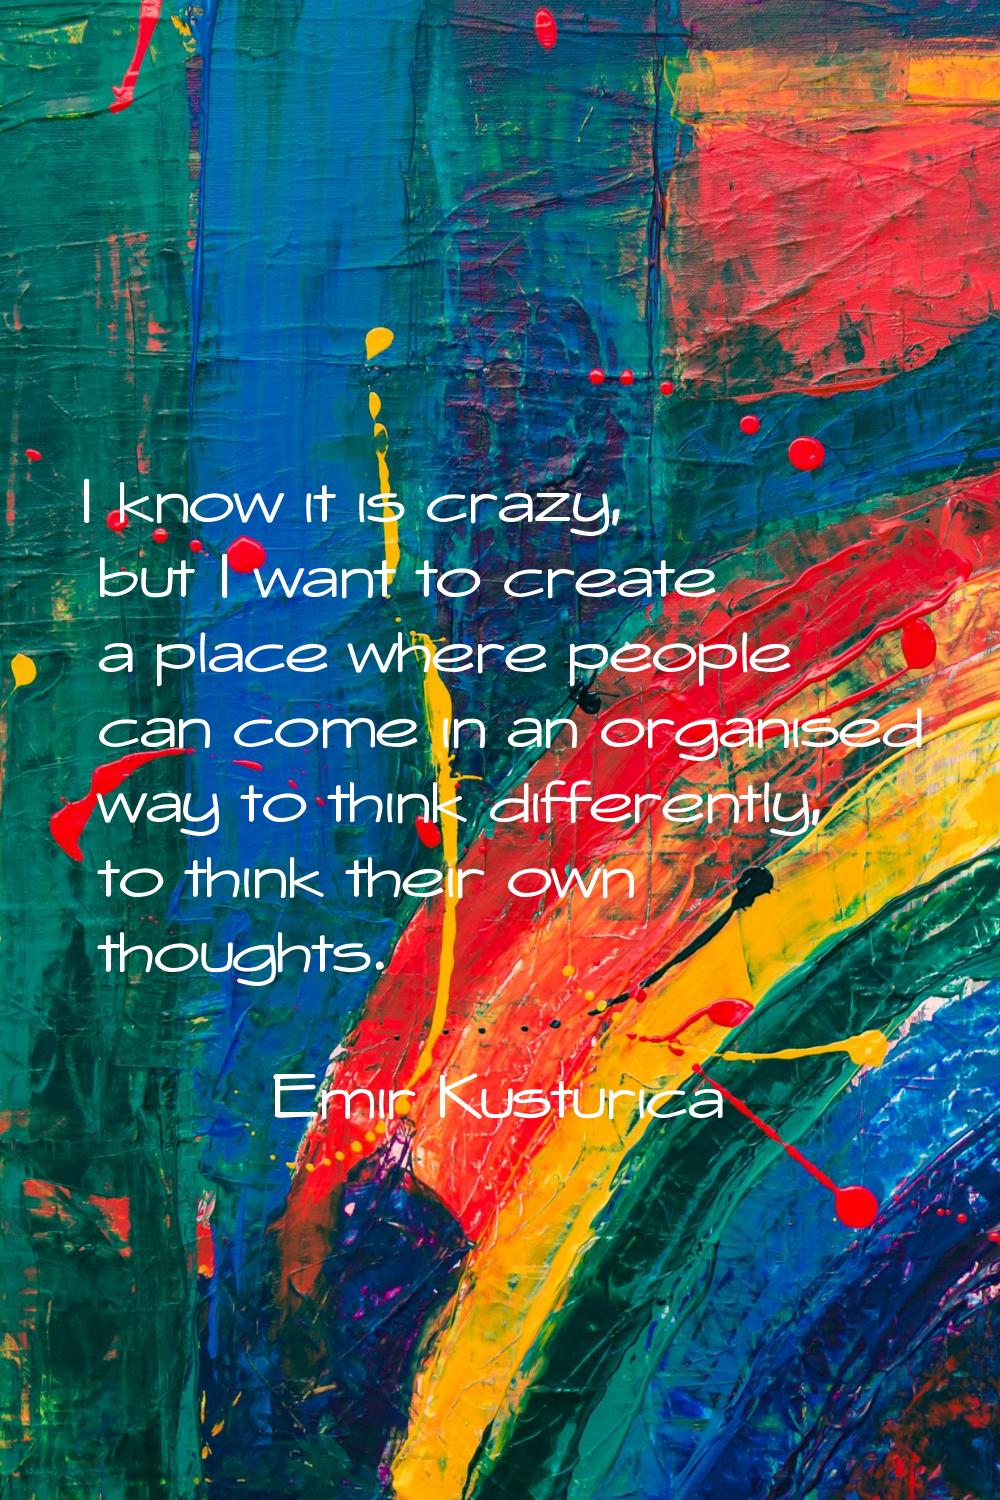 I know it is crazy, but I want to create a place where people can come in an organised way to think